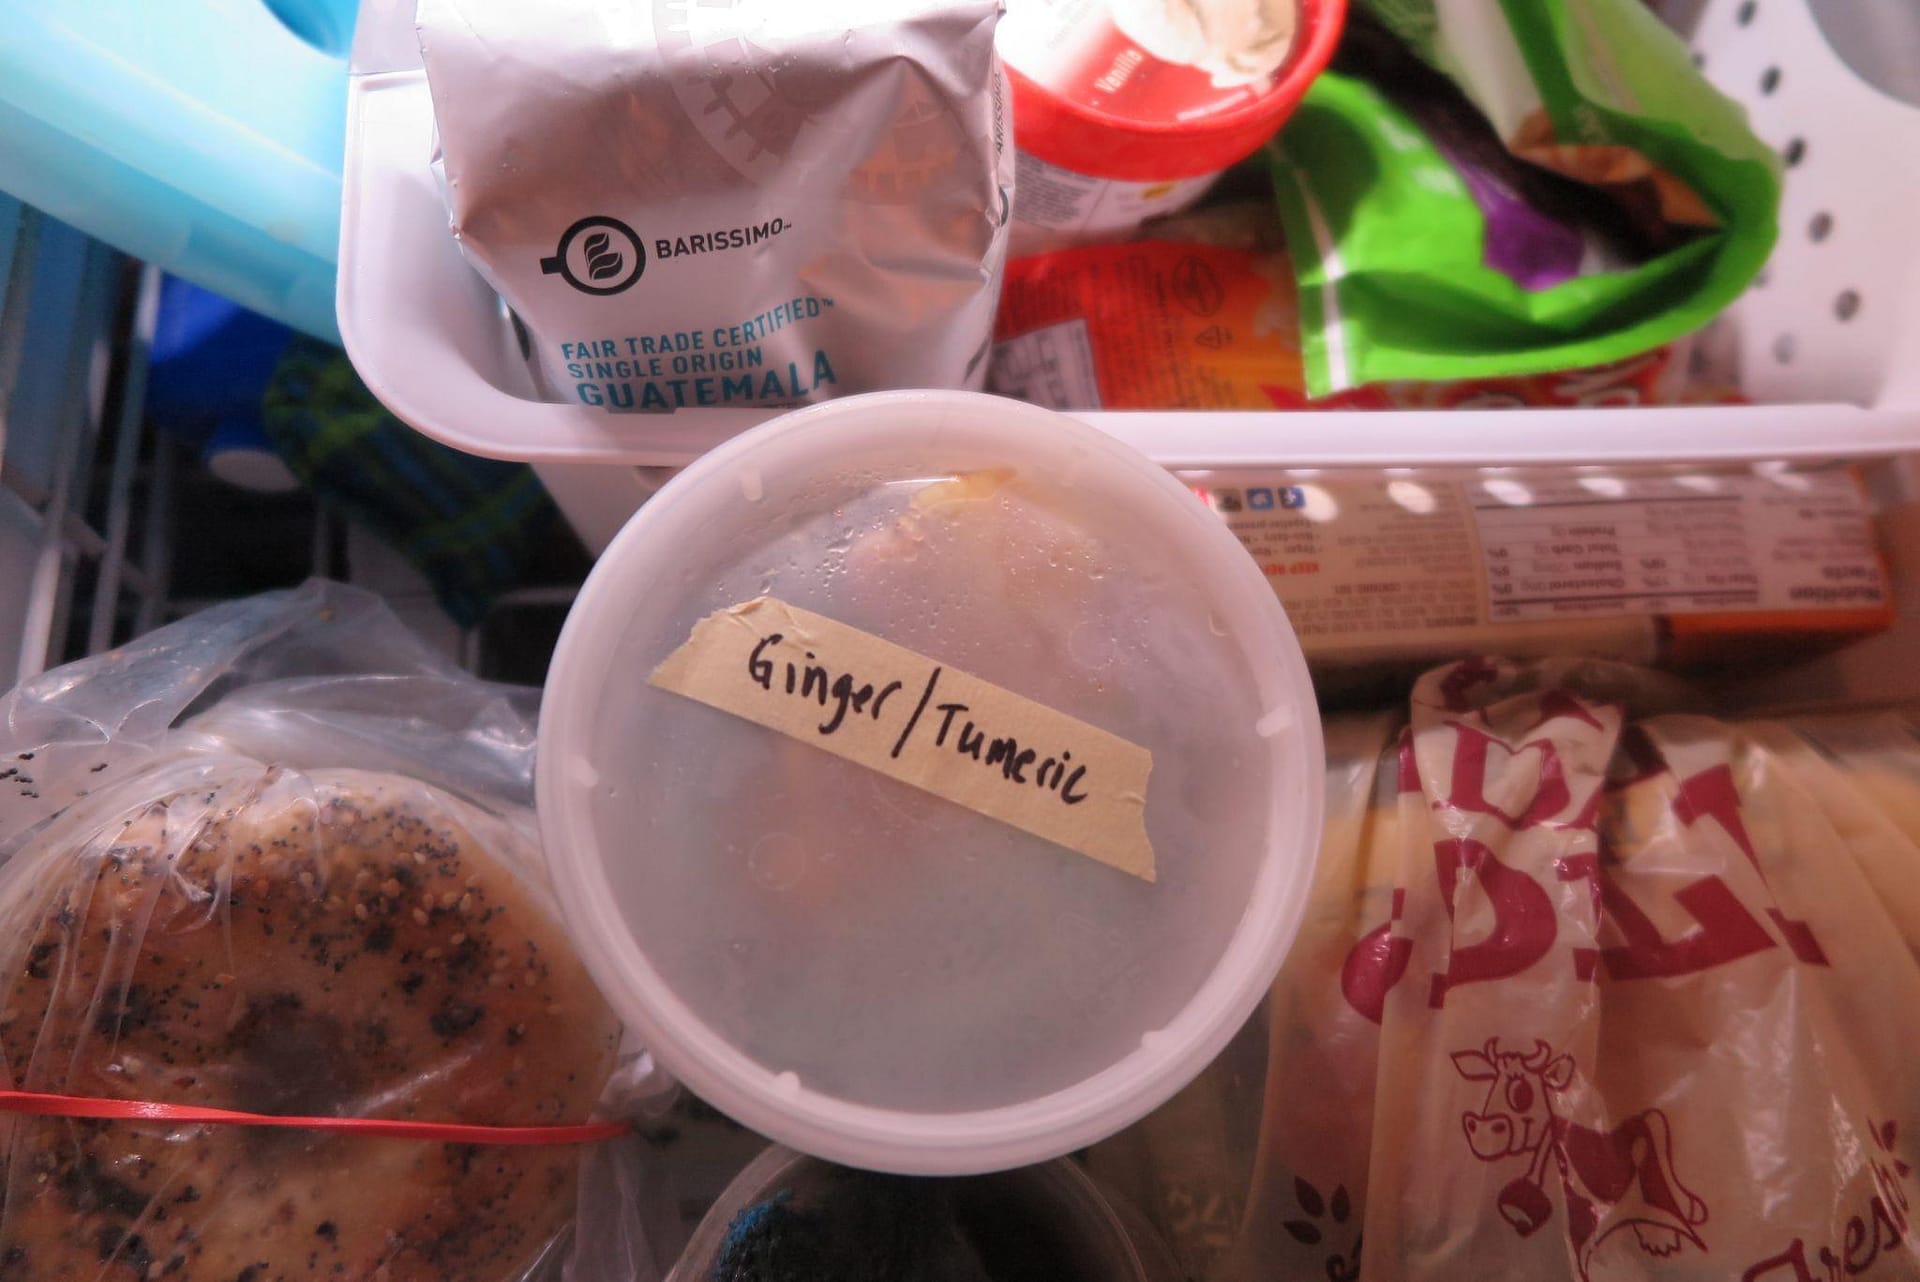 Plastic container labeled 